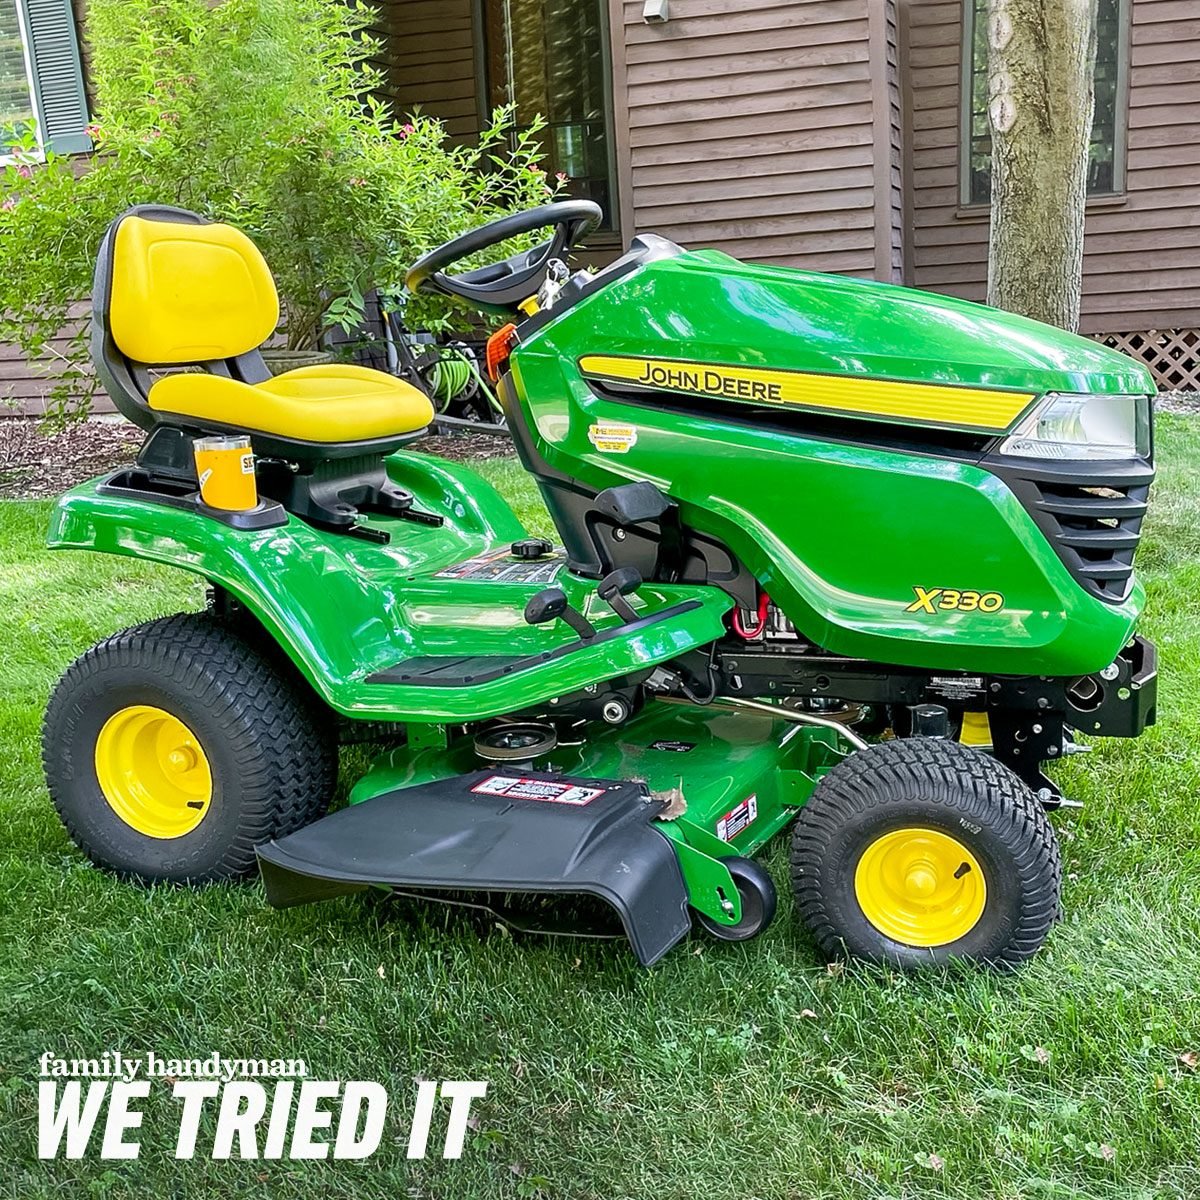 Our Turf Expert Tested the John Deere Riding Lawn Tractor and Here’s Our Verdict